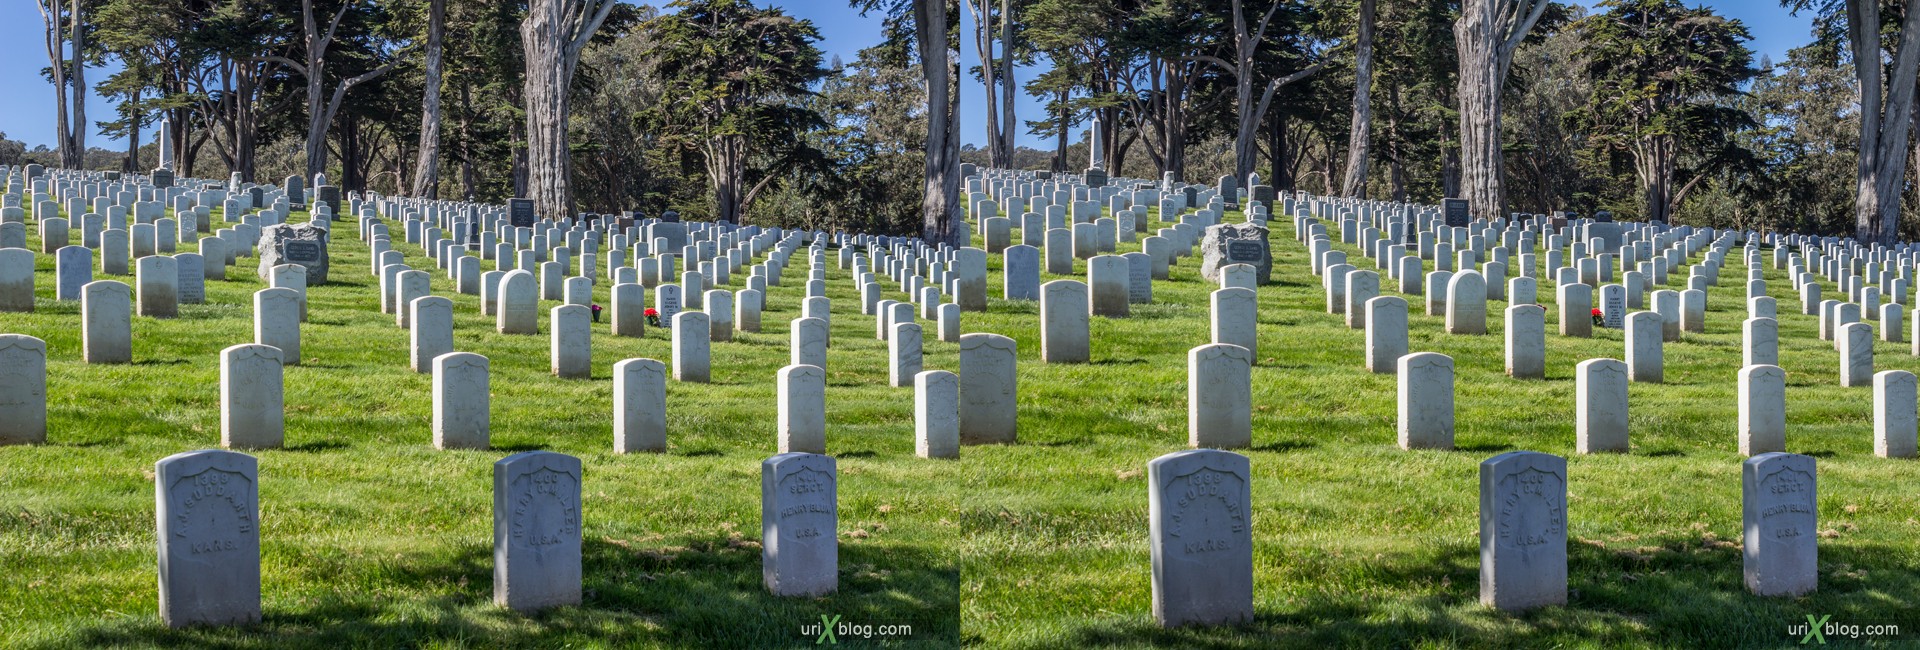 2013, USA, California, San Francisco National Cemetery, 3D, stereo pair, cross-eyed, crossview, cross view stereo pair, stereoscopic